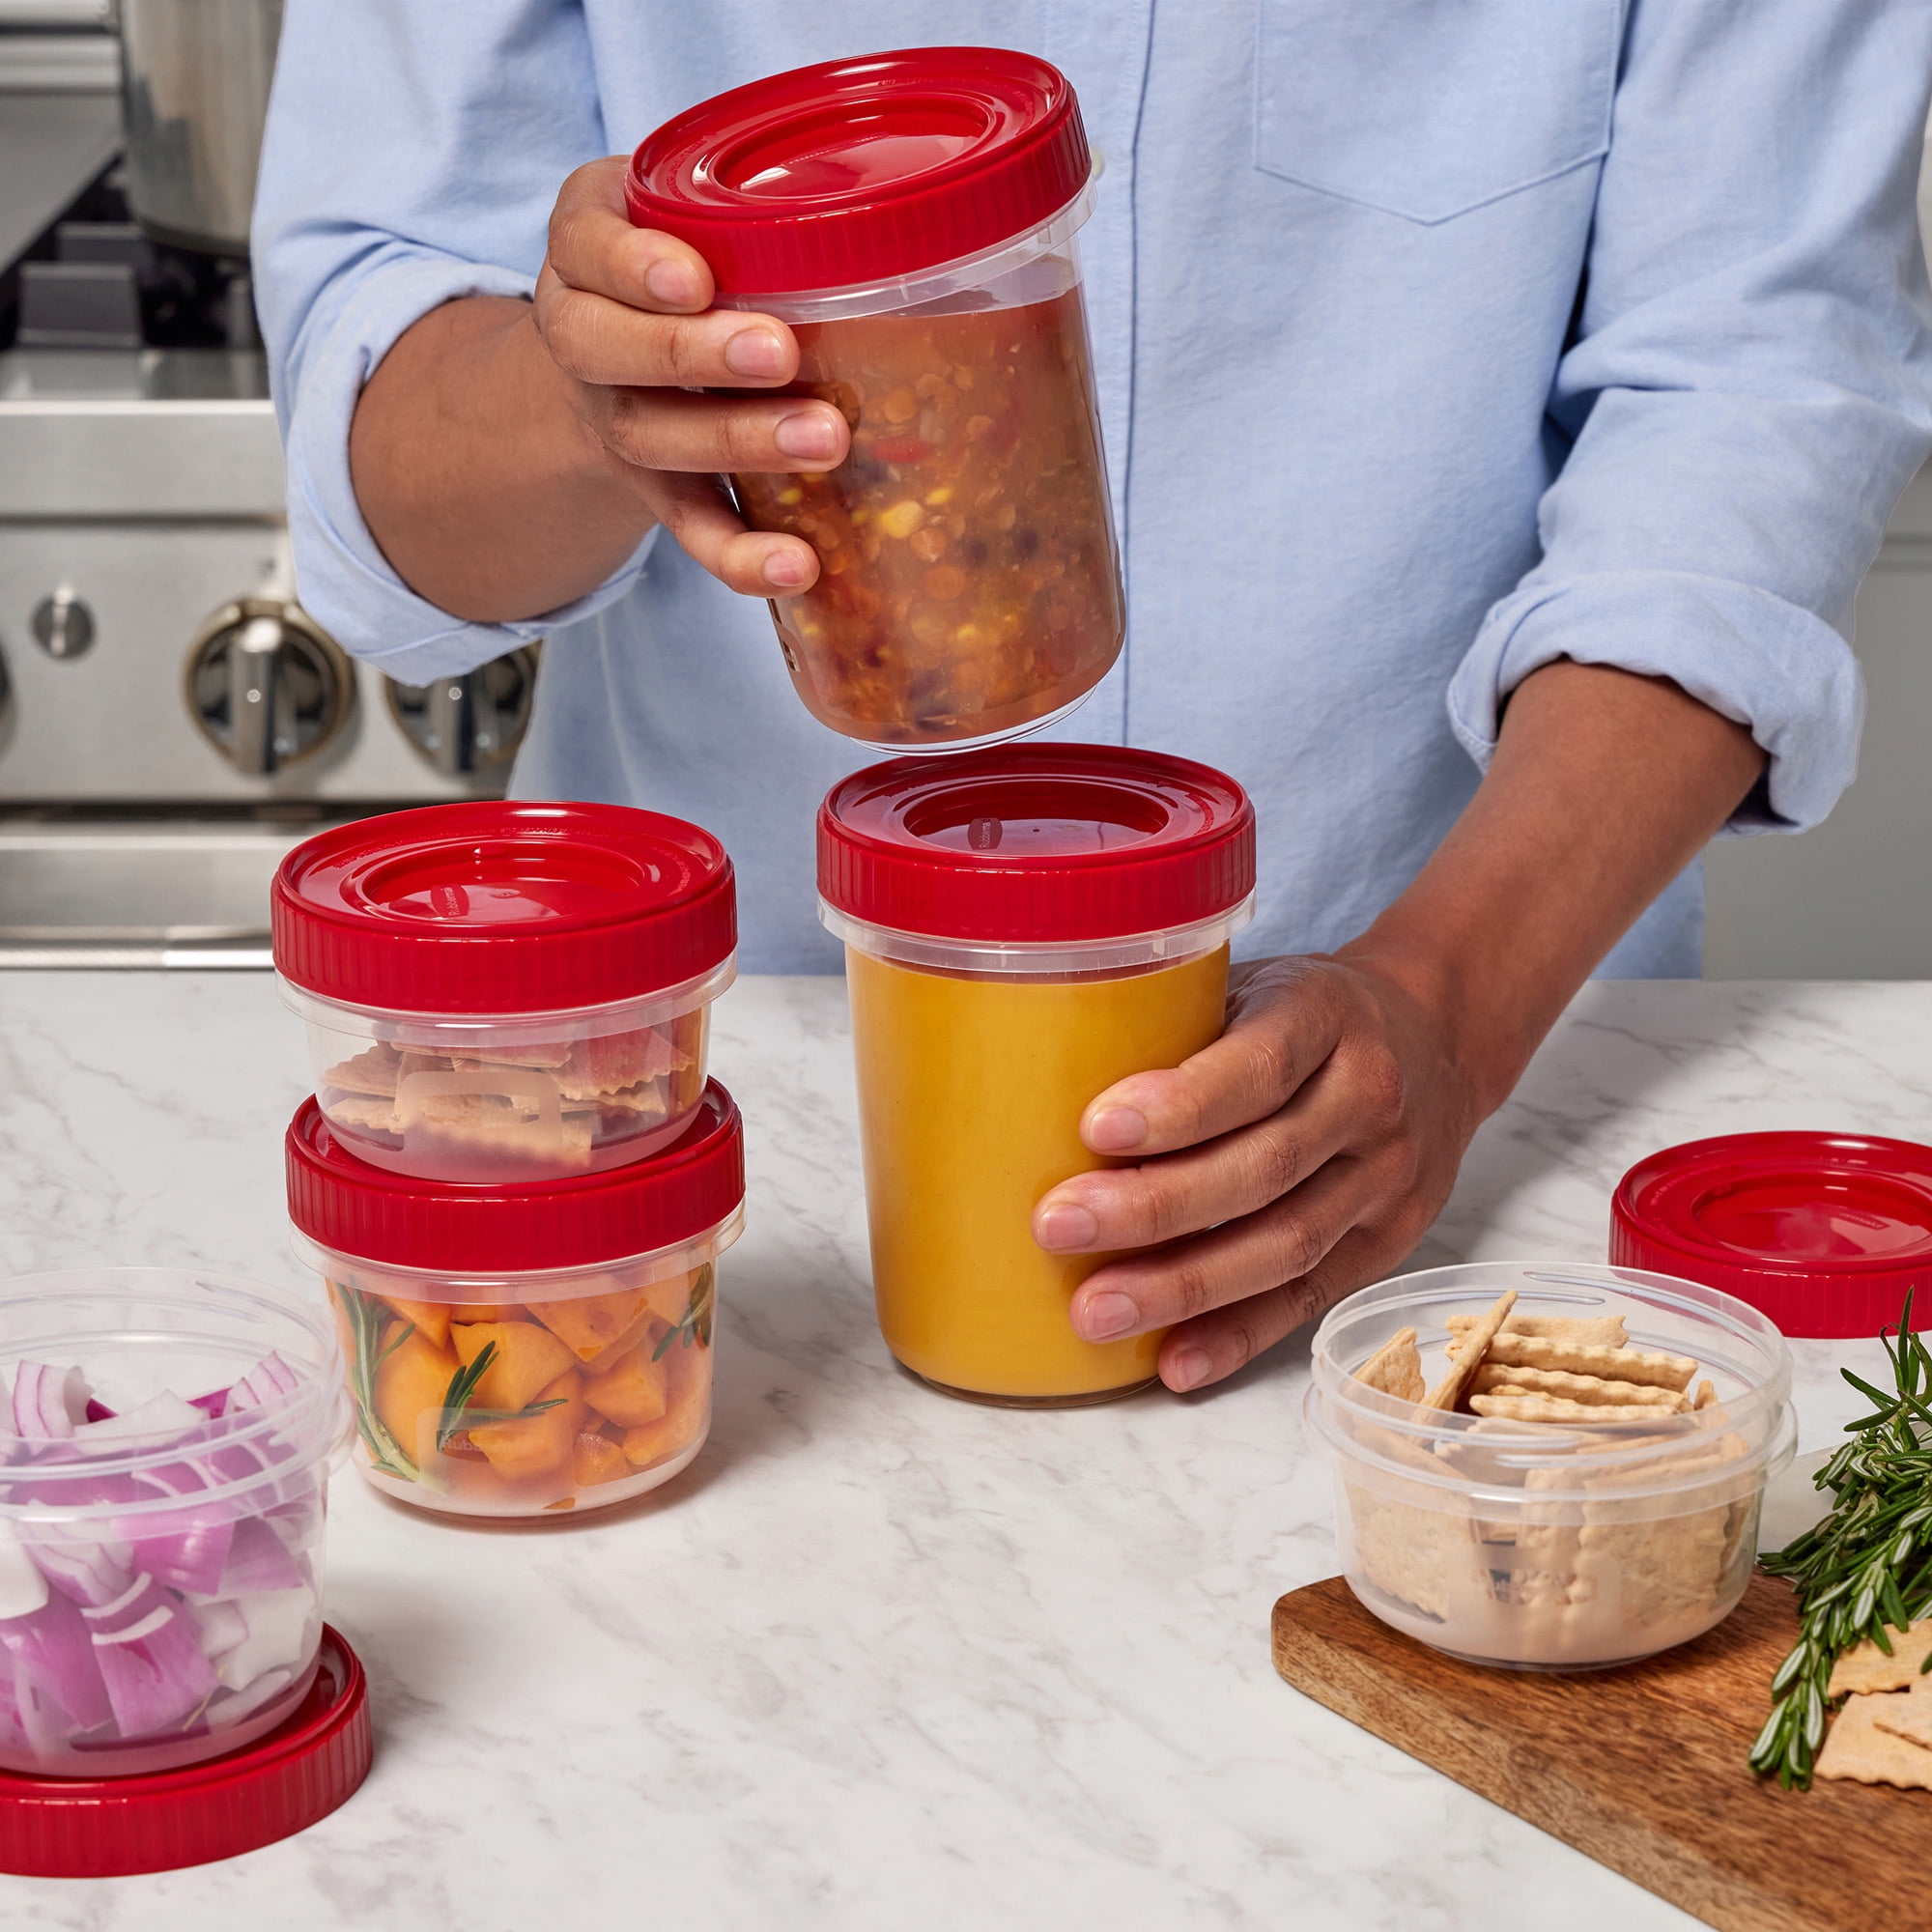 Rubbermaid Take Alongs Containers, Trays & Lids, Twist & Seal - 3 containers trays & lids